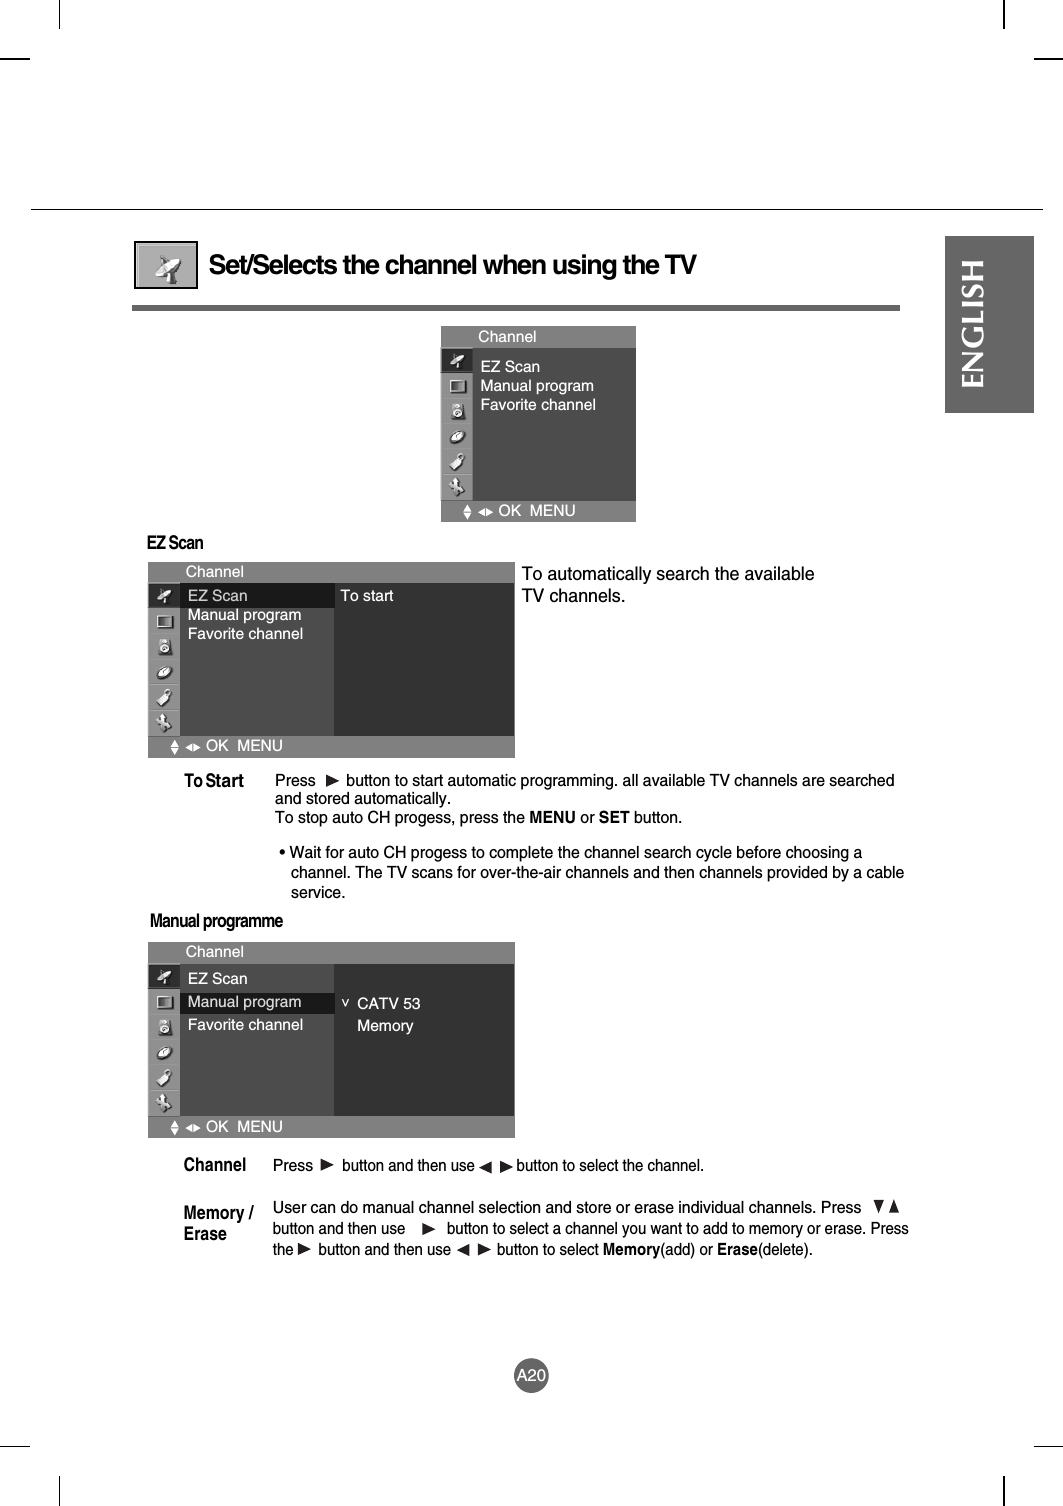 A20ENGLISHSet/Selects the channel when using the TVEZ ScanManual programmeChannelEZ ScanManual programFavorite channelOK  MENUChannelOK  MENUEZ ScanManual programFavorite channelTo startChannelOK  MENUEZ ScanManual programFavorite channelCATV 53Memory&lt;Press  button to start automatic programming. all available TV channels are searchedand stored automatically. To stop auto CH progess, press the MENU or SET button. • Wait for auto CH progess to complete the channel search cycle before choosing achannel. The TV scans for over-the-air channels and then channels provided by a cableservice.To StartTo automatically search the available TV channels.Pressbutton and then use          button to select the channel.User can do manual channel selection and store or erase individual channels. Pressbutton and then use          button to select a channel you want to add to memory or erase. Pressthe      button and then use           button to select Memory(add) or Erase(delete).Channel Memory /Erase